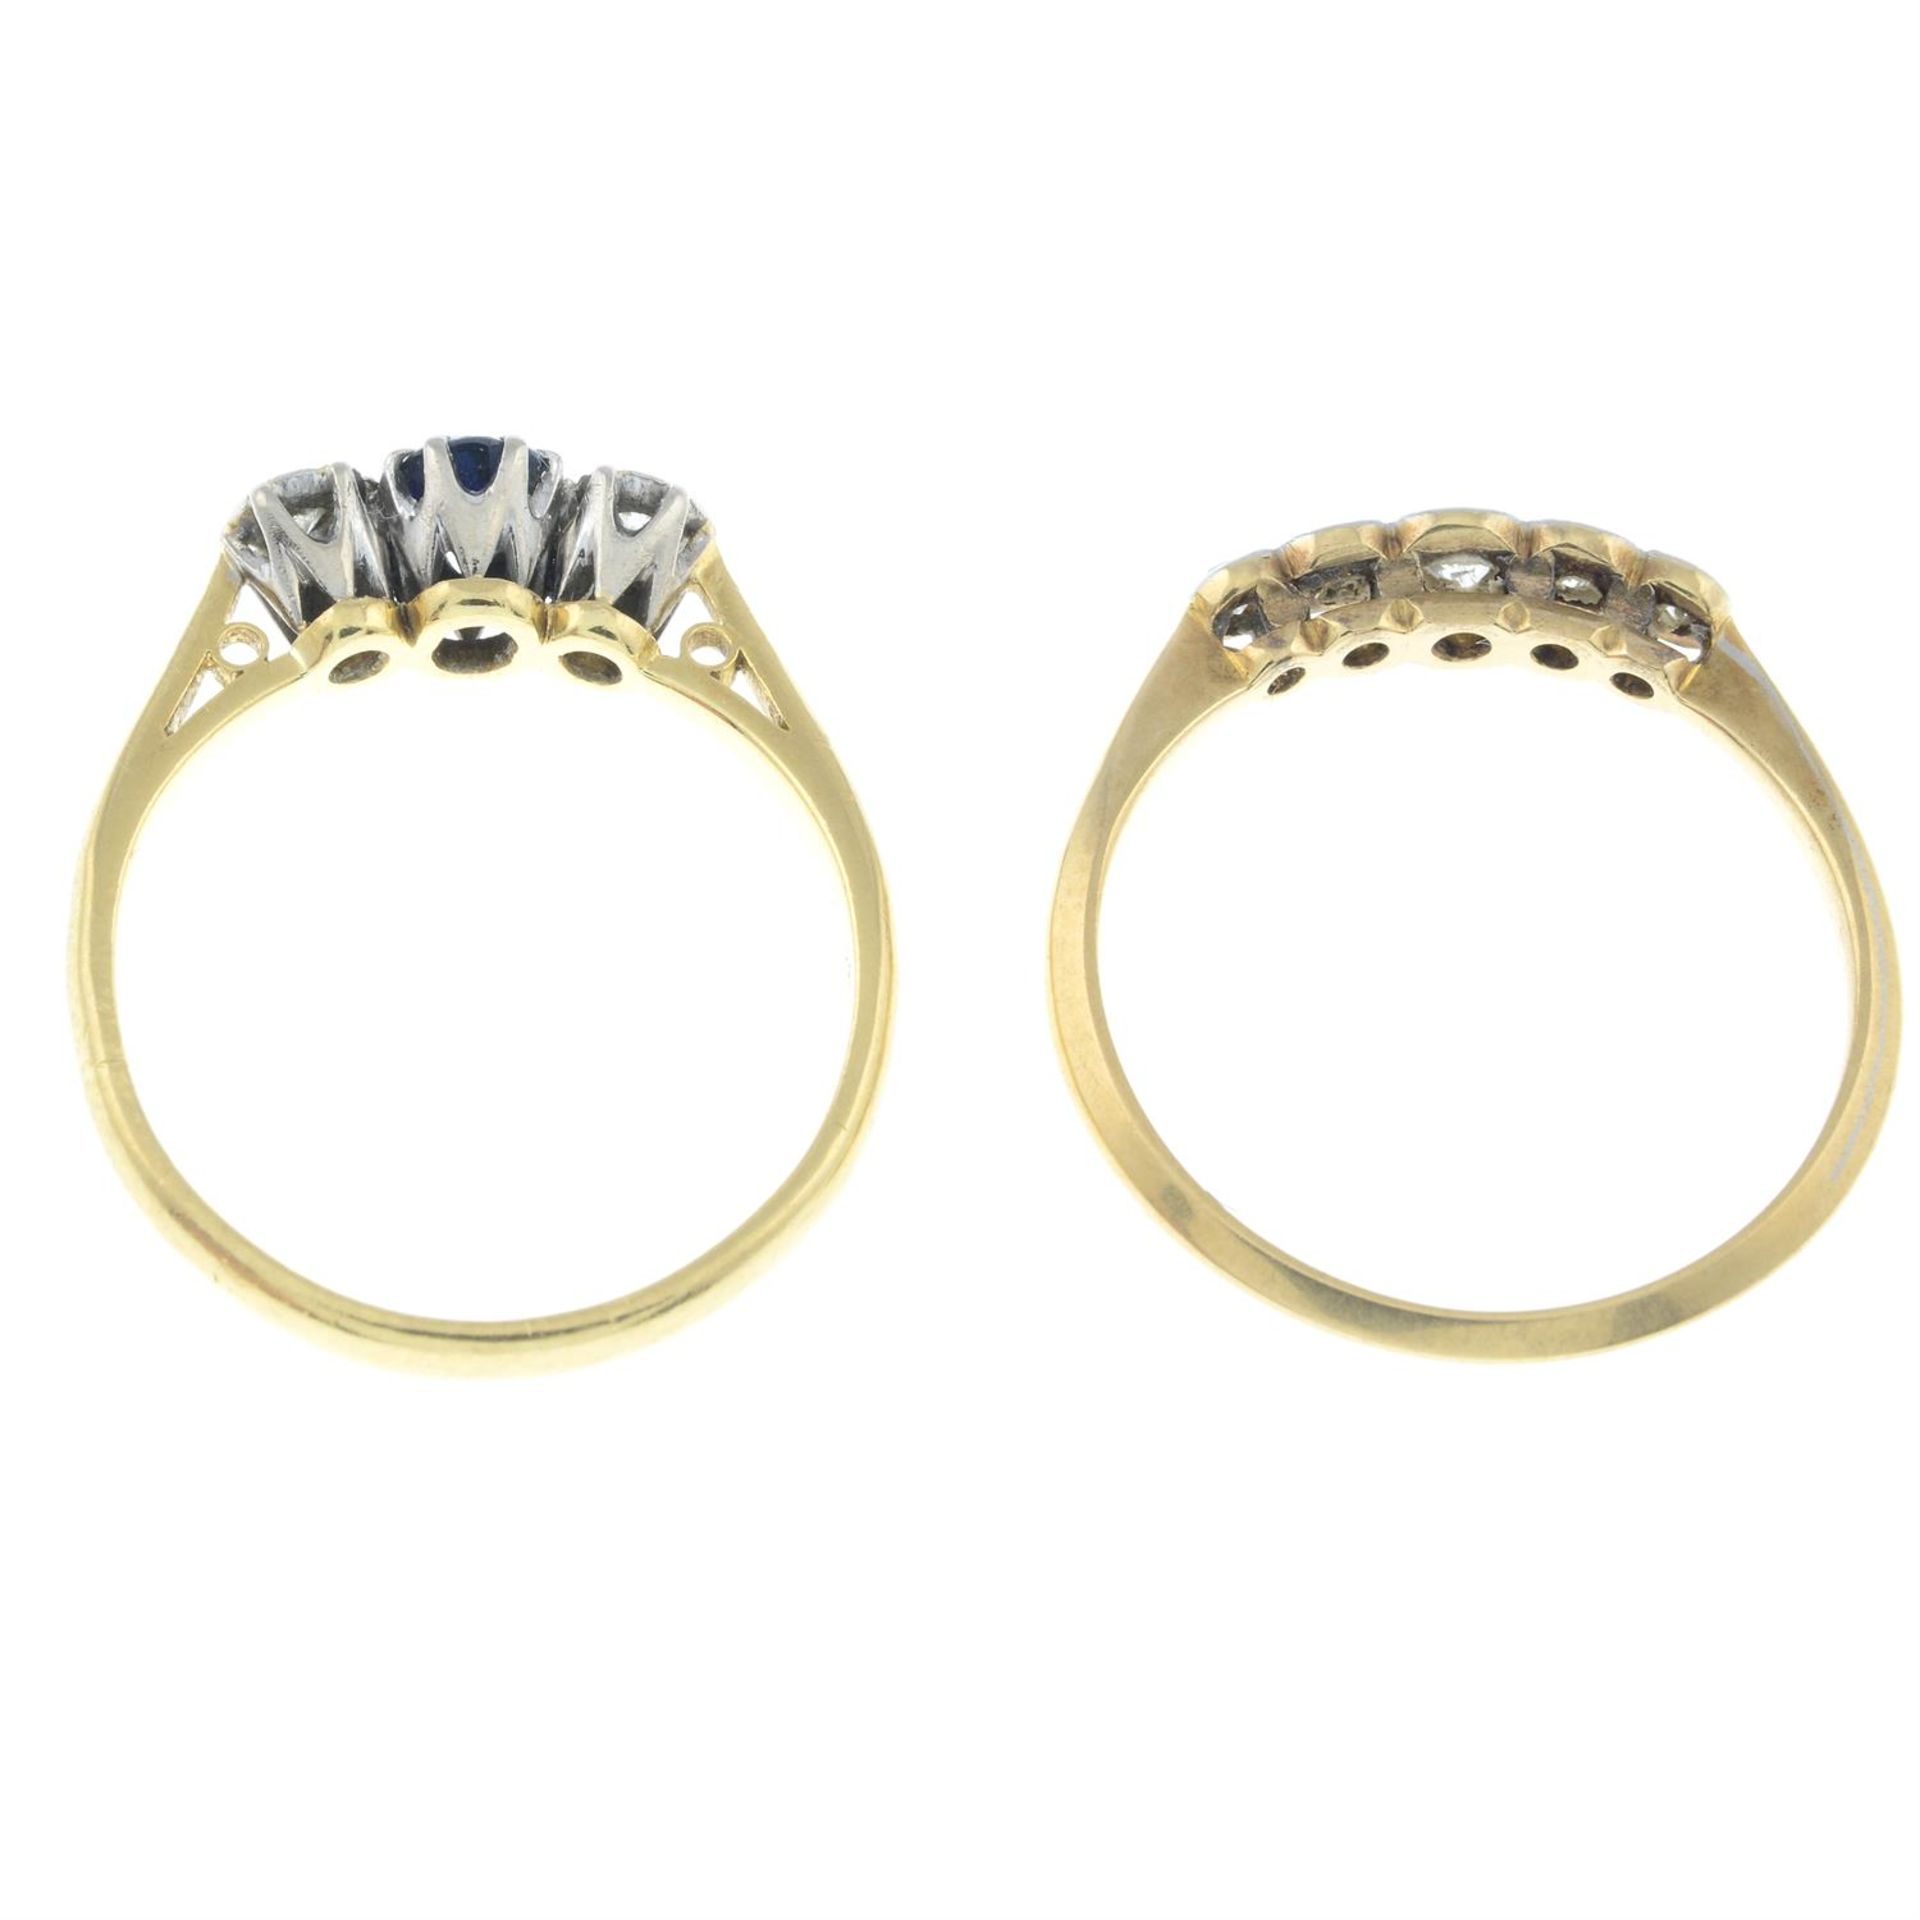 A sapphire and diamond three-stone ring and a diamond five-stone ring. - Image 2 of 2